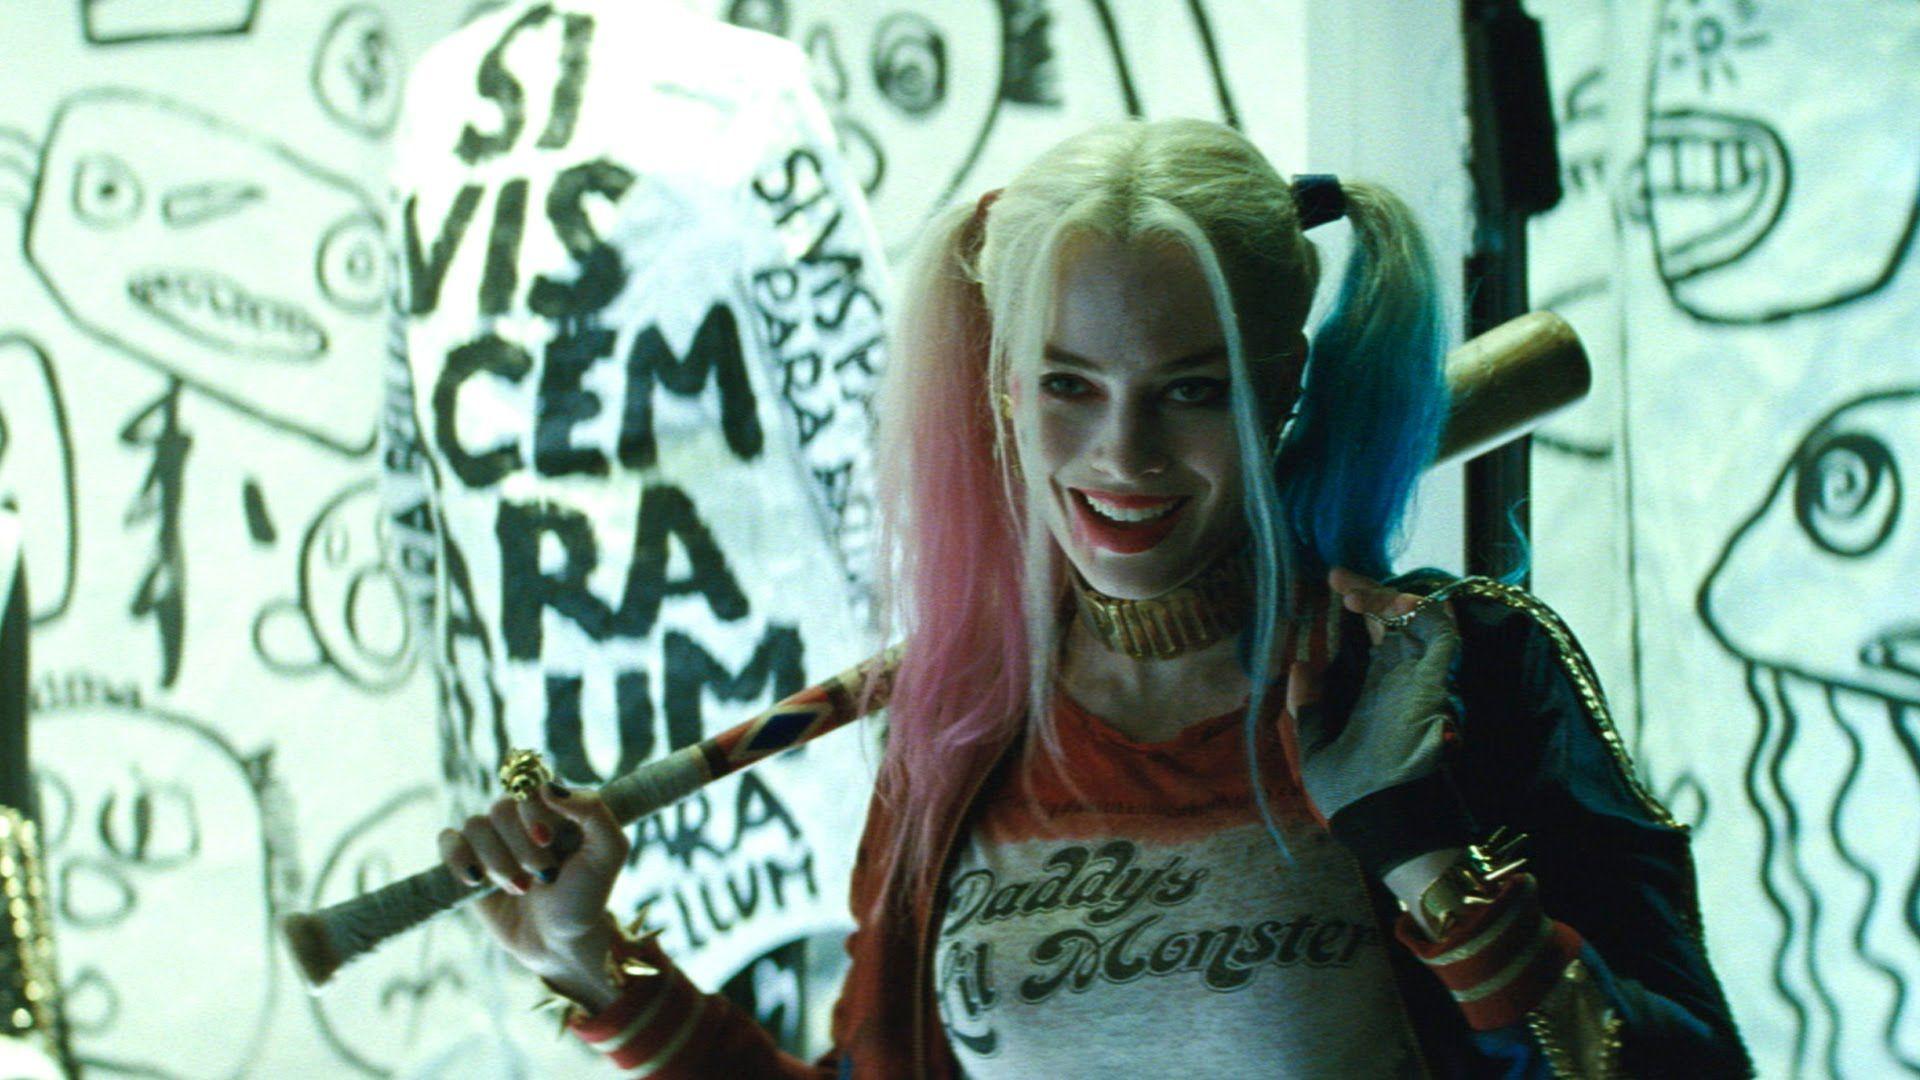 HD Image Suicide Squad Collection